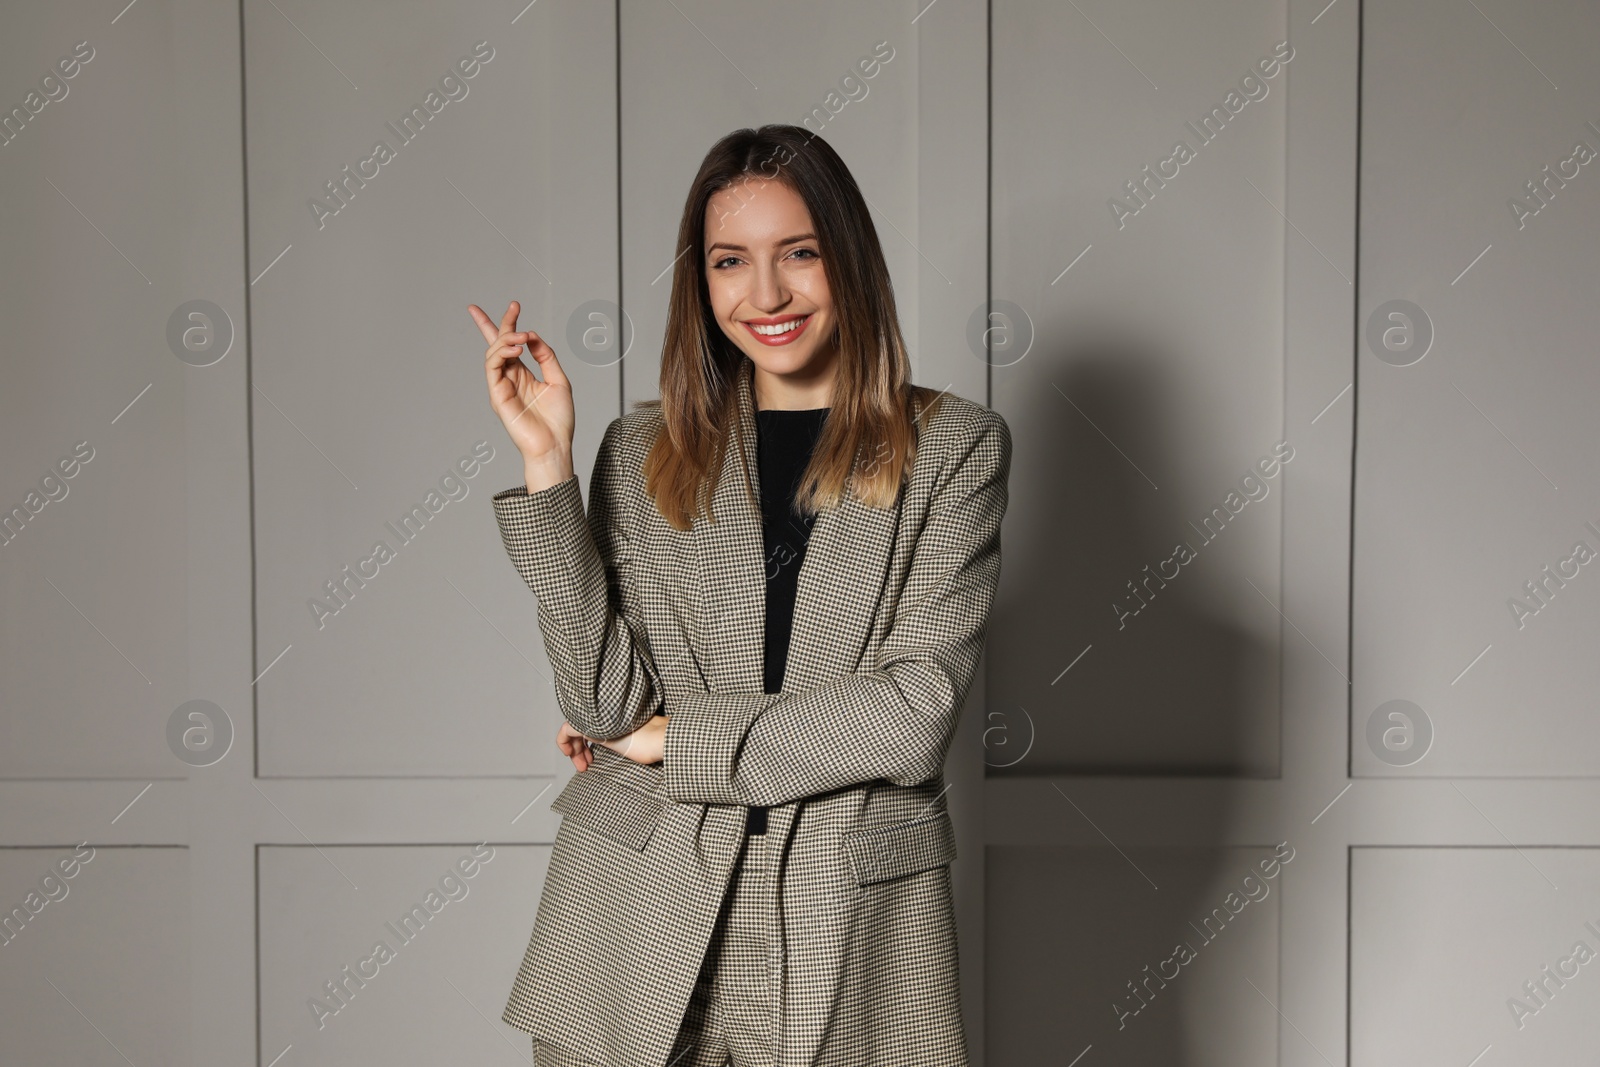 Photo of Portrait of beautiful young woman in fashionable suit near light grey wall. Business attire